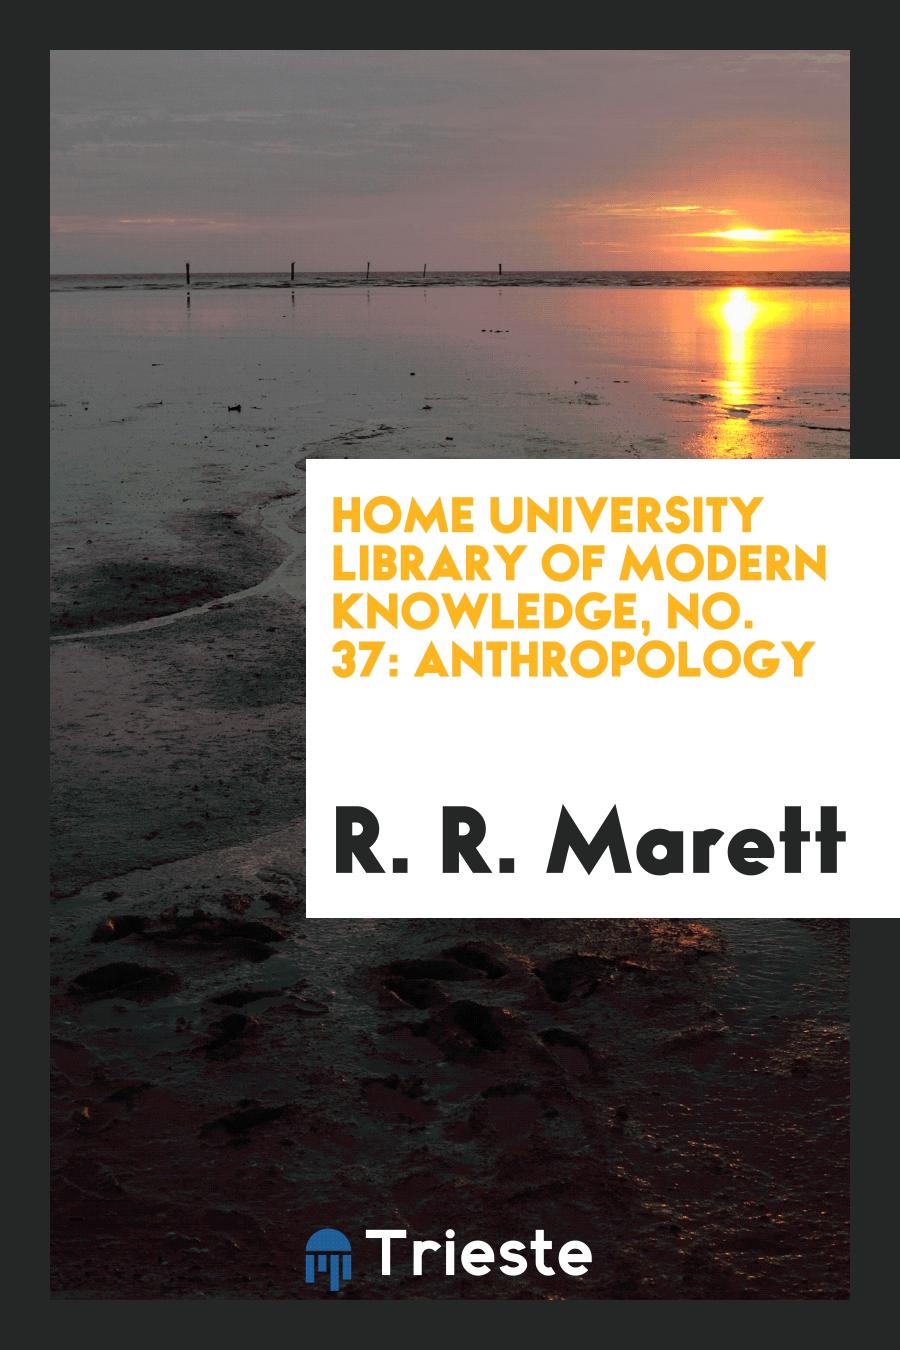 Home University Library of Modern Knowledge, No. 37: Anthropology